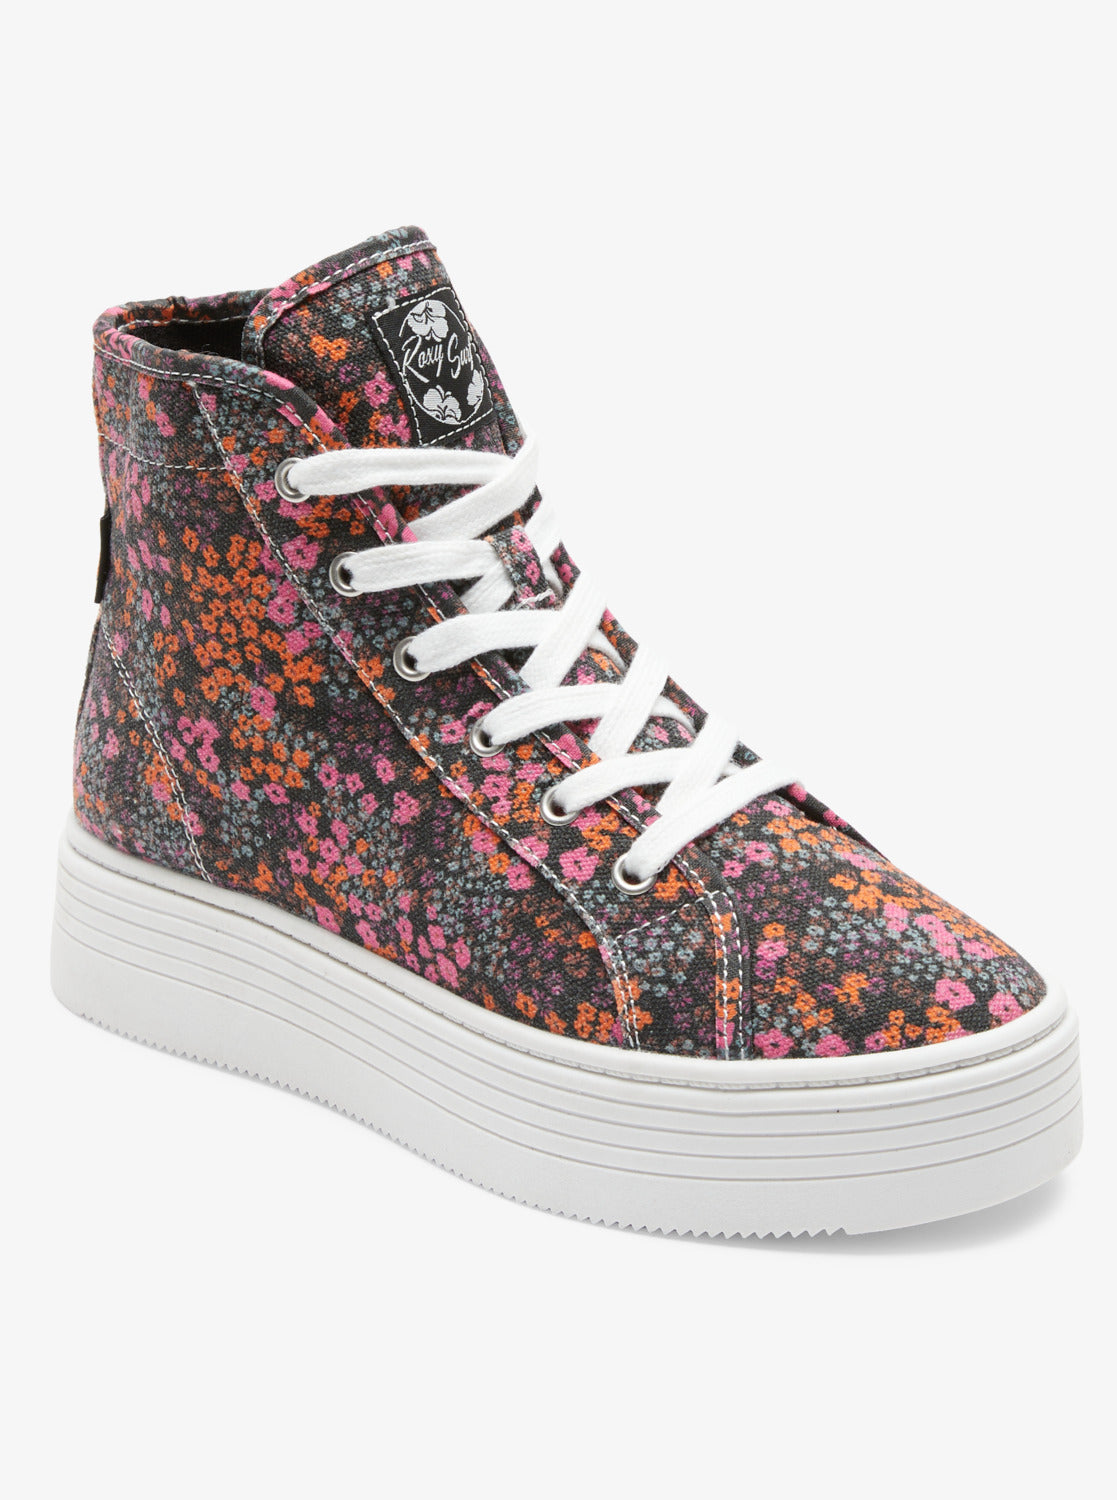 Sheilahh 2.0 Mid-Top Shoes - Black Multi – Roxy.com